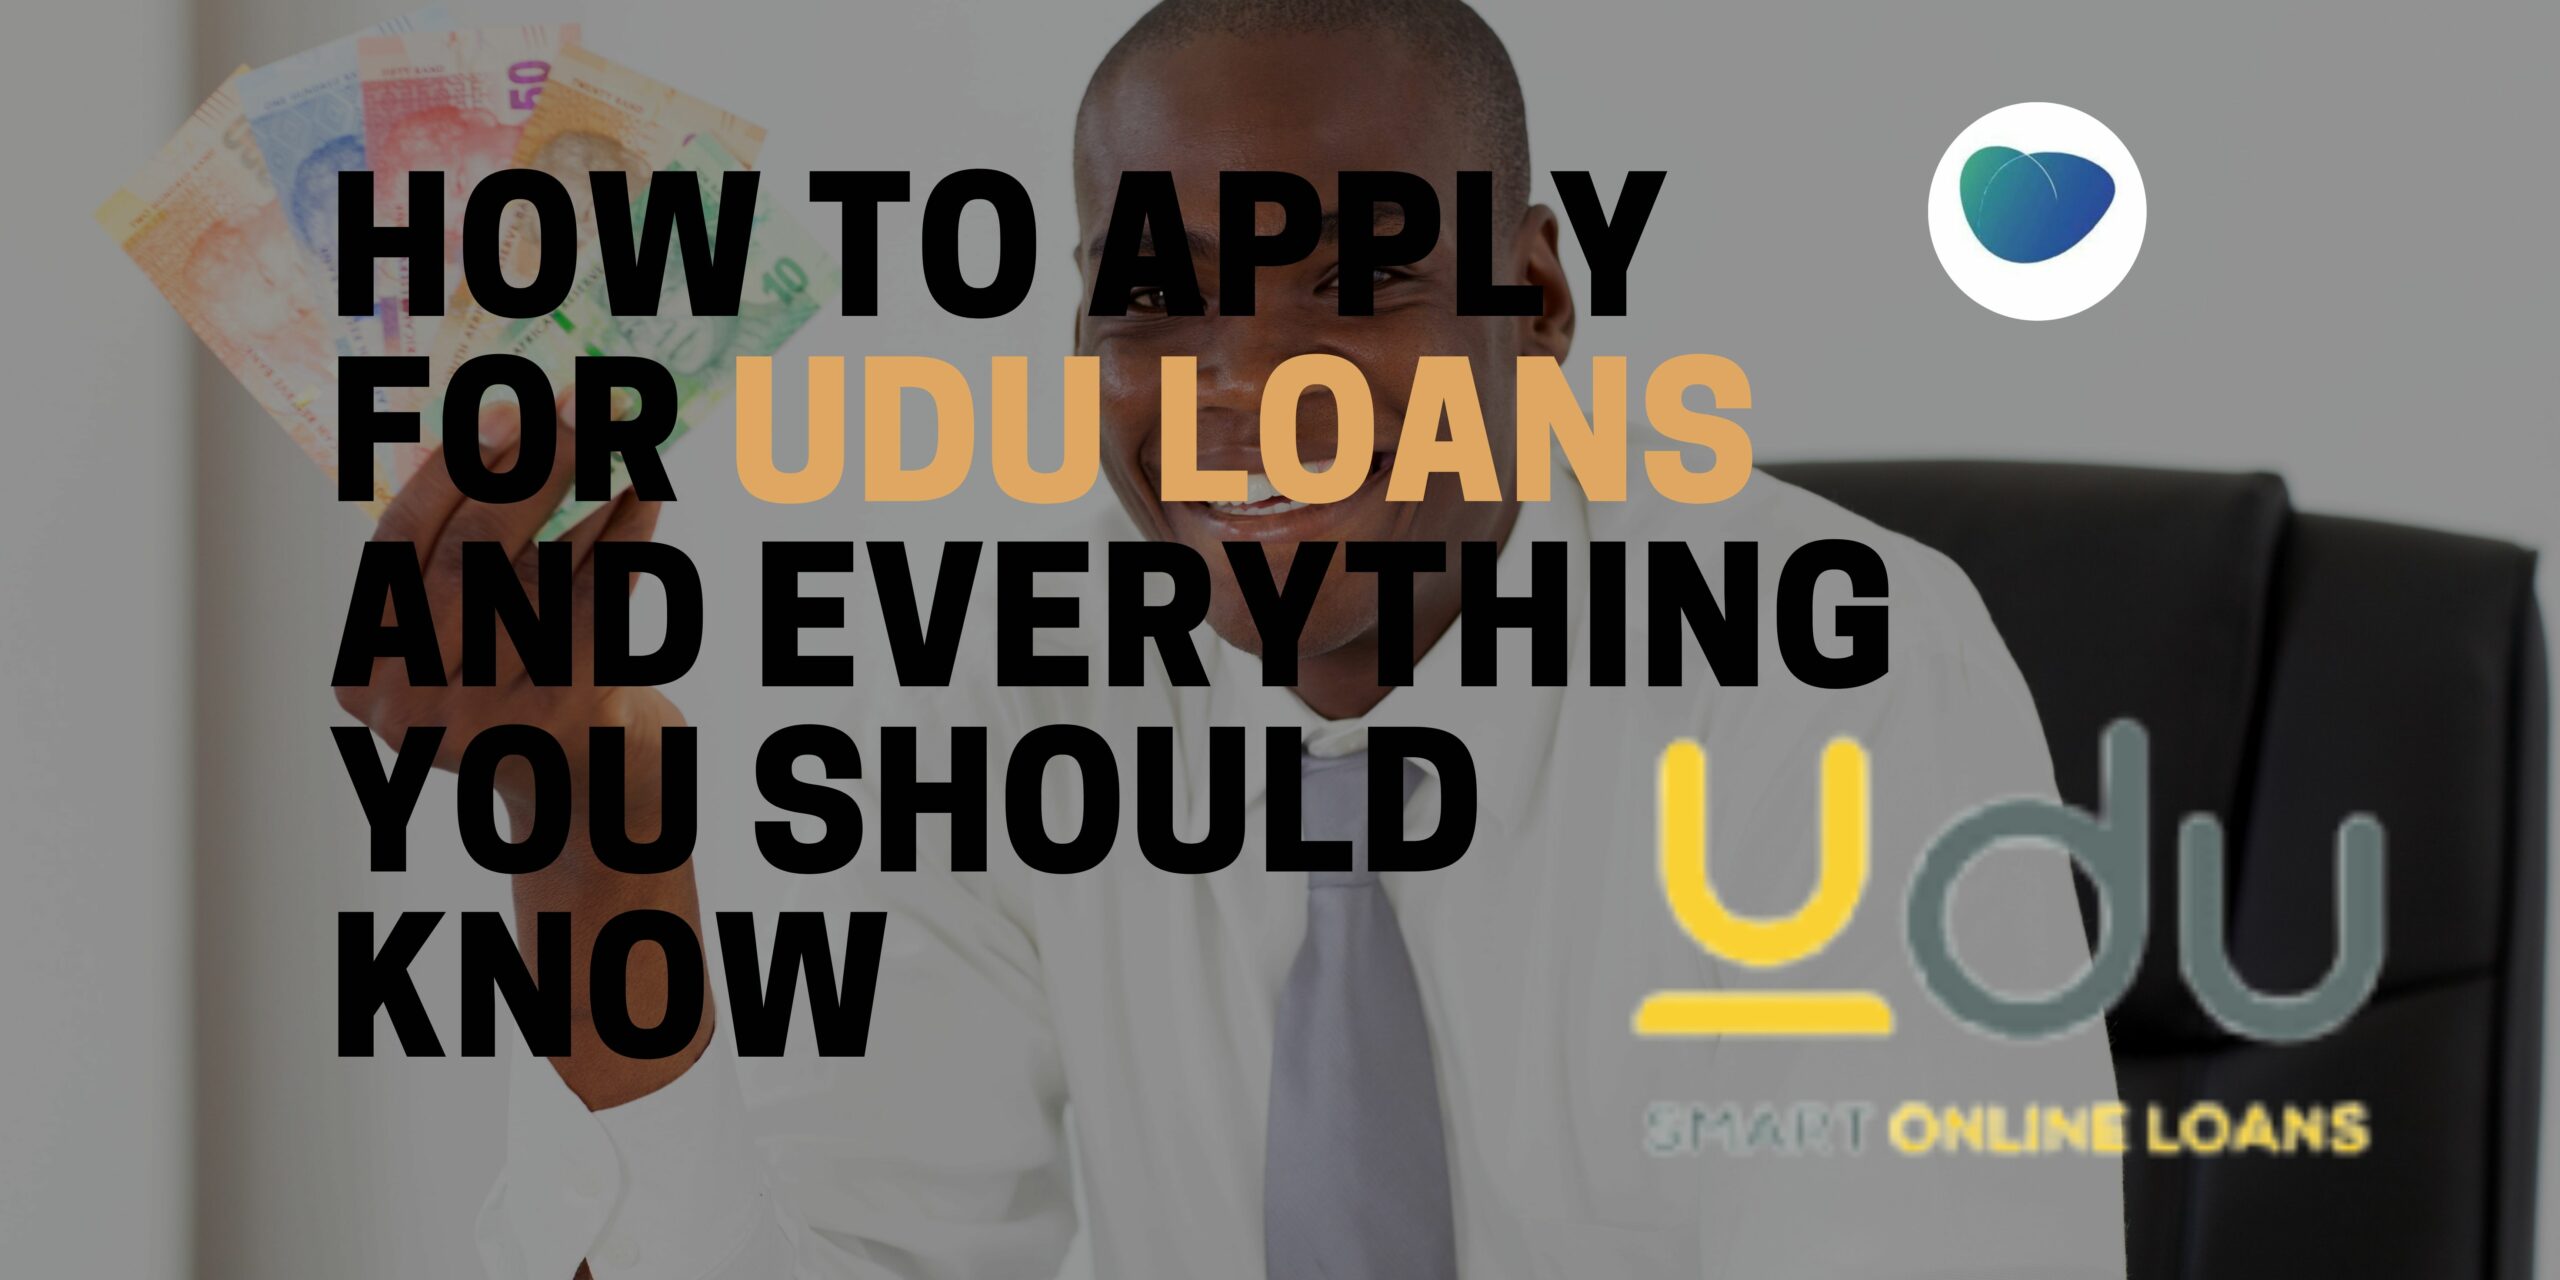 Udu Loans Review- What you should know - Loanspot.io South Africa